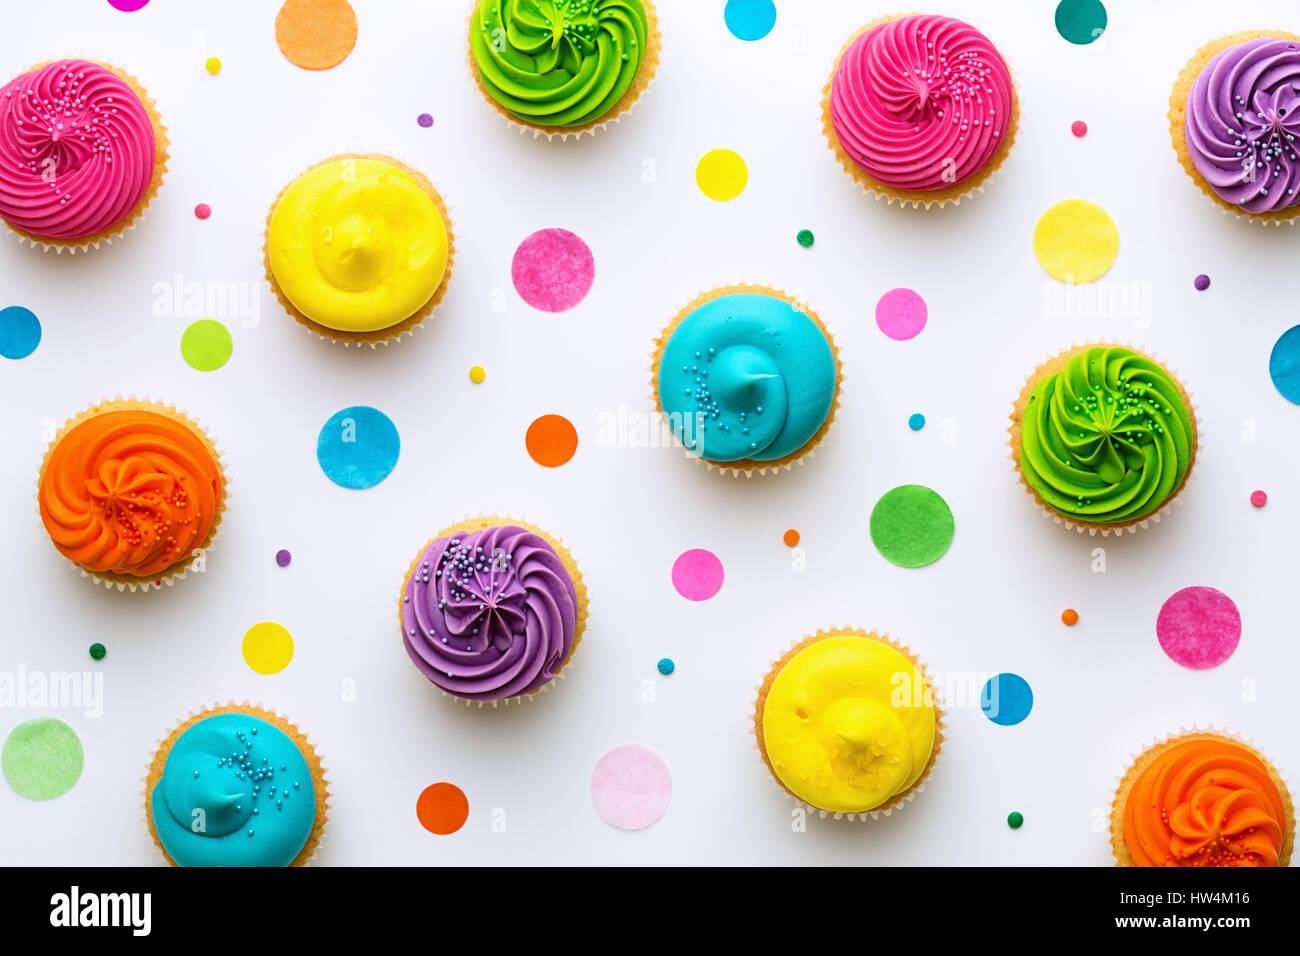 Colorful cupcakes on a white background Stock Photo